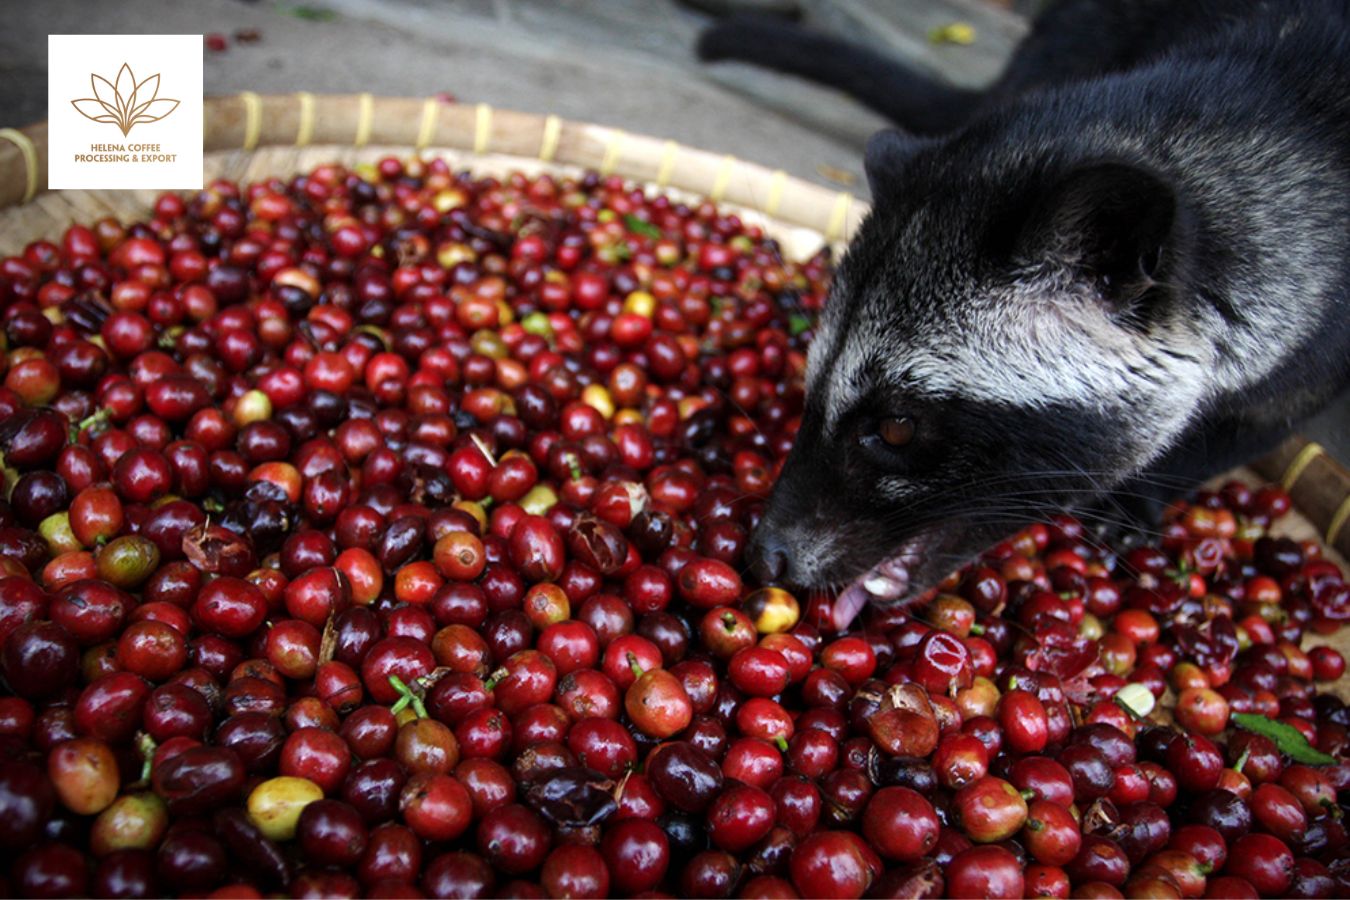 most expensive coffee kopi luwak : luwak coffee the opulence dive into the history coffees